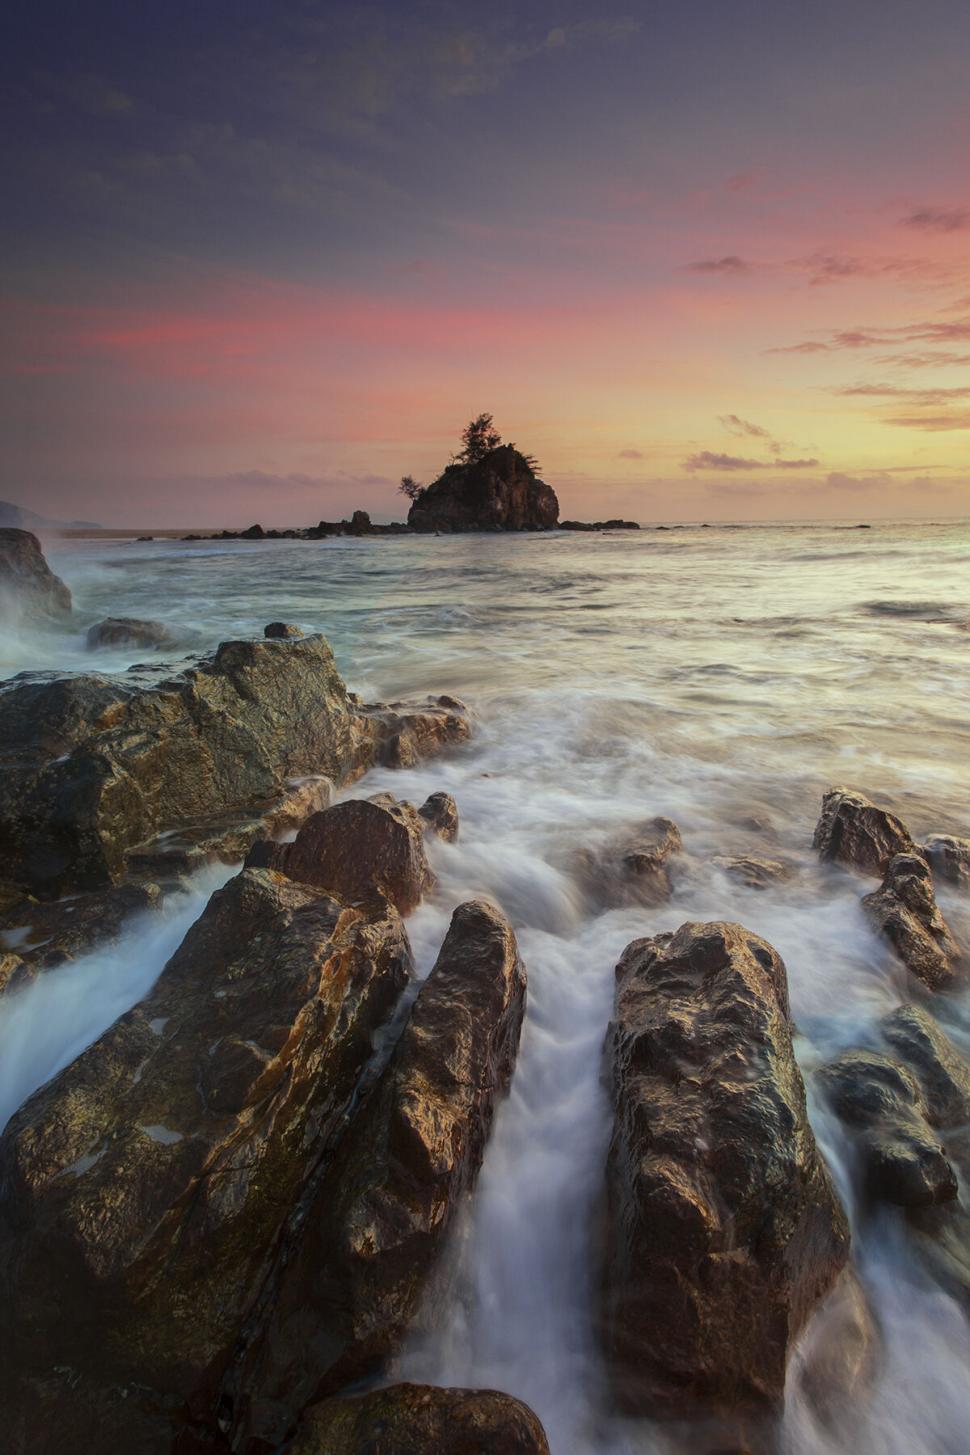 Free Image of Sunset seascape with rocky shoreline and island 